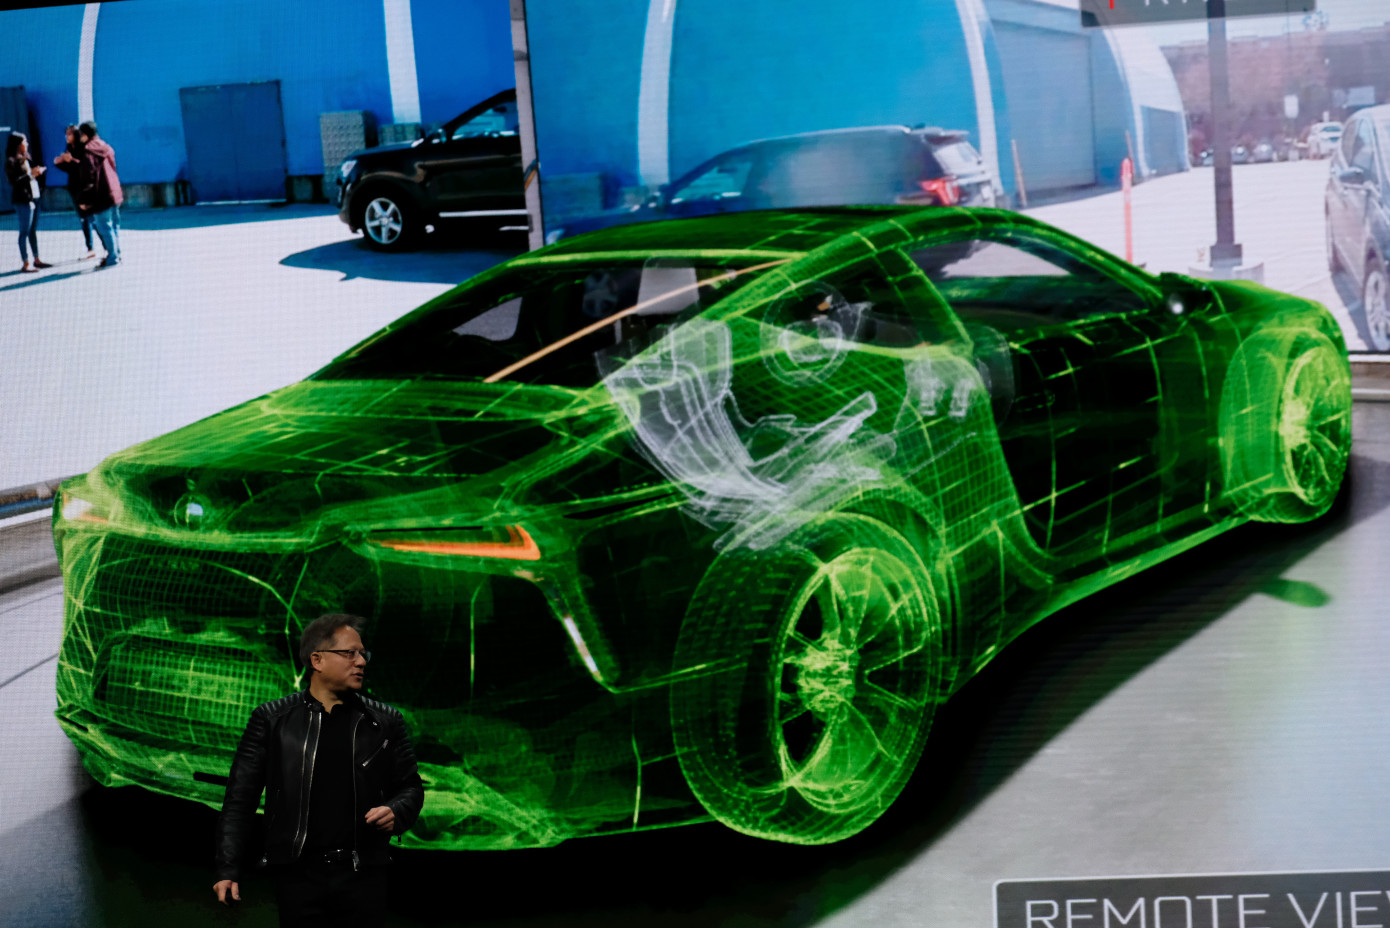 Nvidia – Blurring the Lines Between Virtual Reality and Real Life